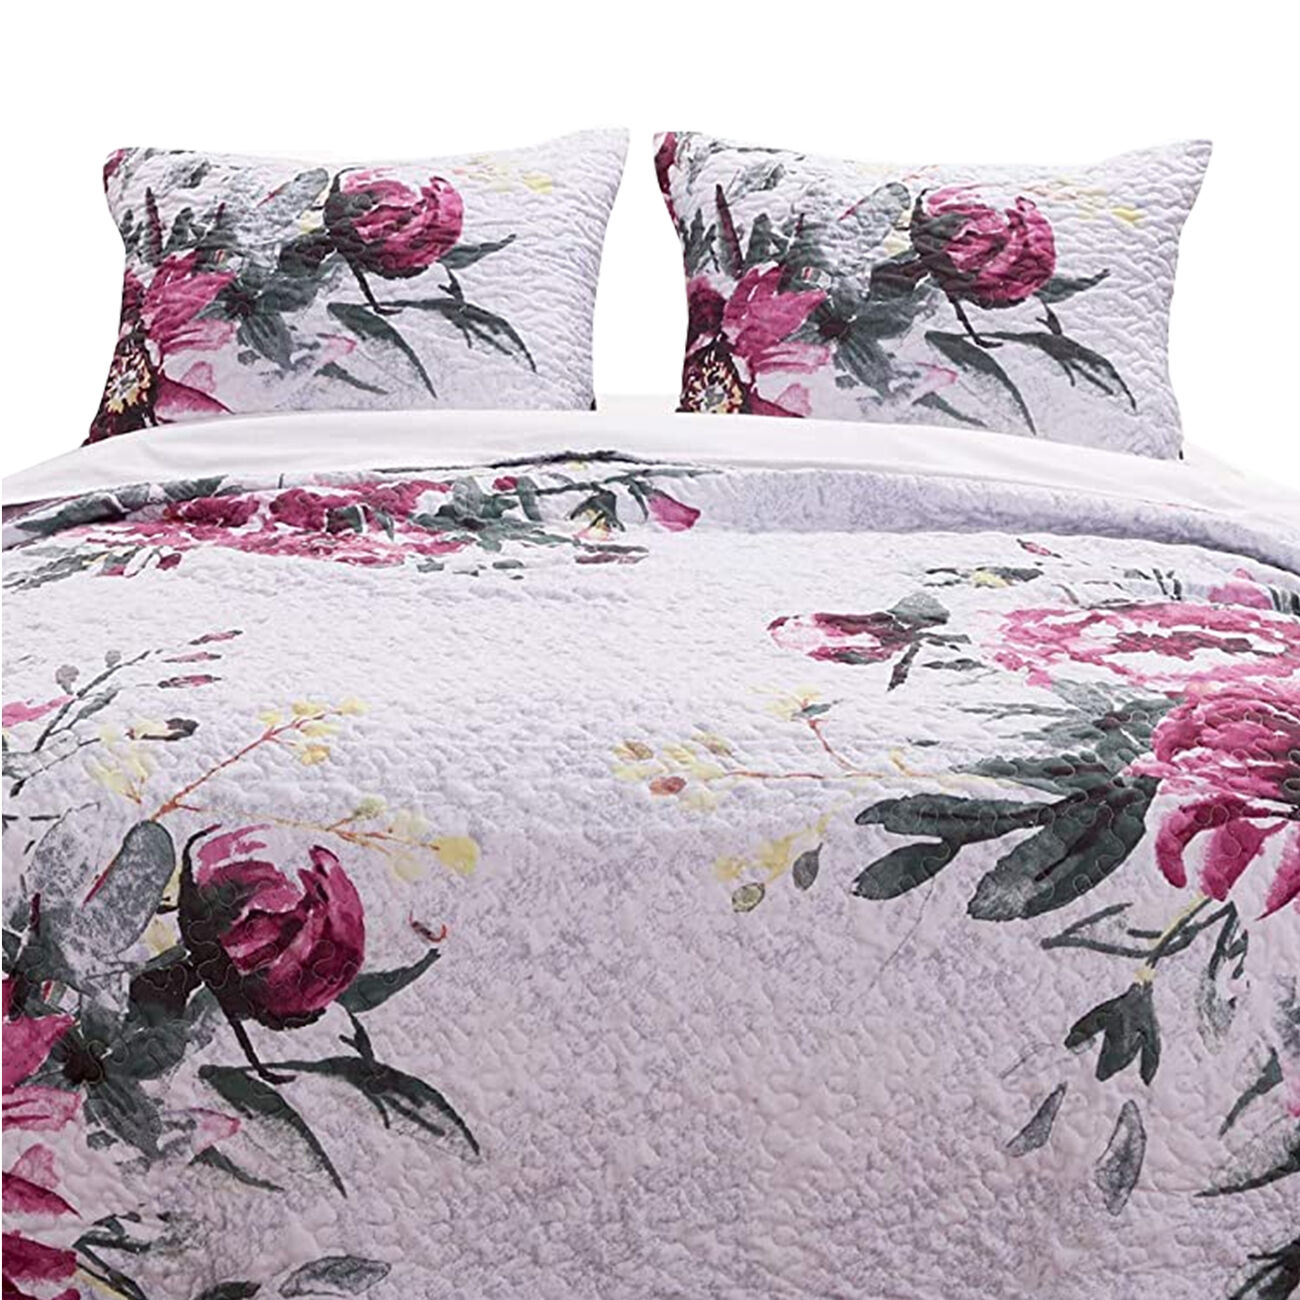 Twin Size 2 Piece Polyester Quilt Set with Rose Prints, Multicolor